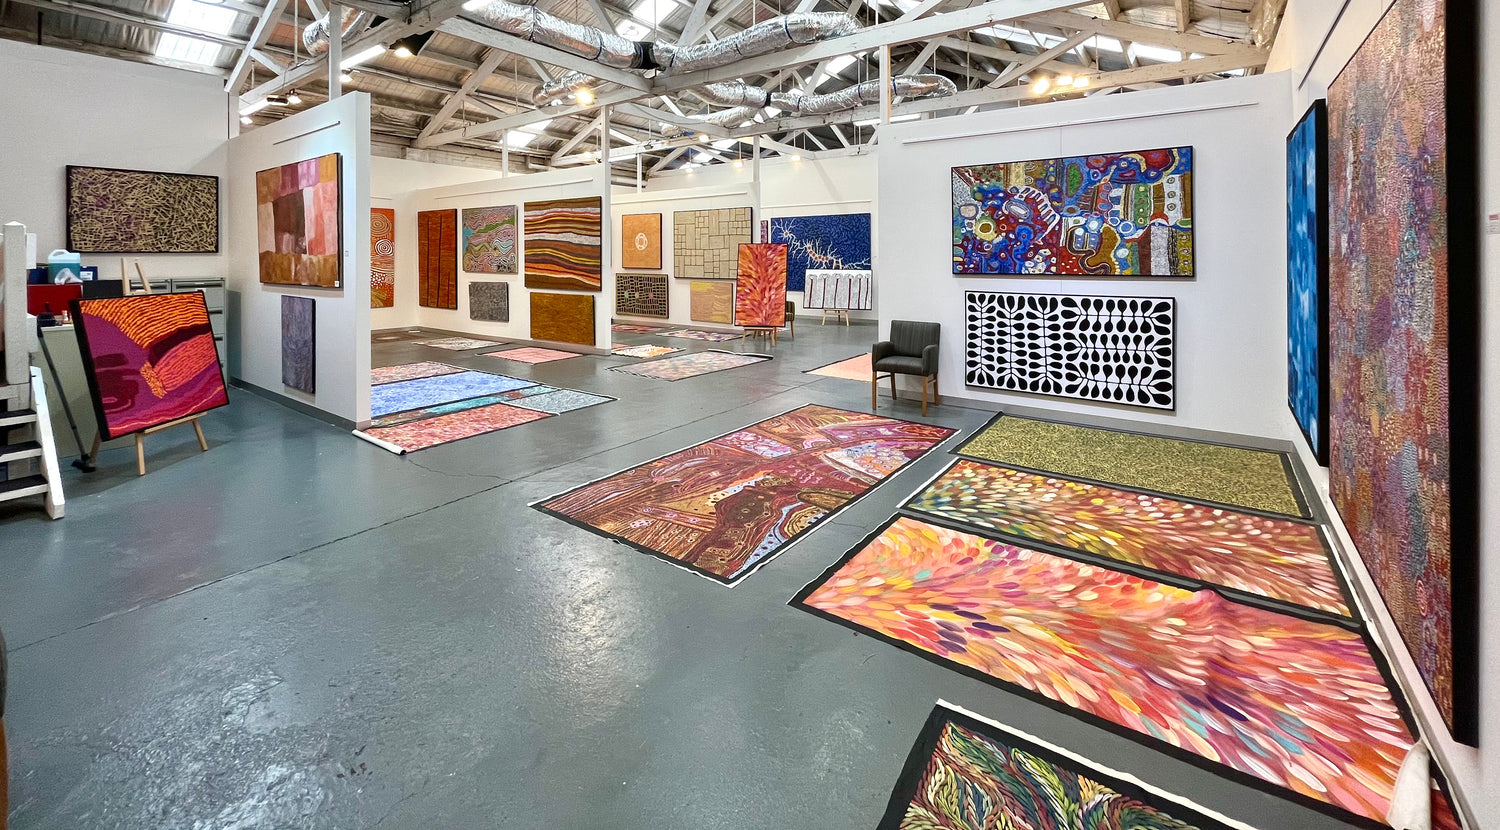 Mandel Art Gallery is the biggest and best aboriginal art gallery in Melbourne. We host prominent aboriginal artists who are the successors of our distinctive ranges of indigenous artwork in our gallery.